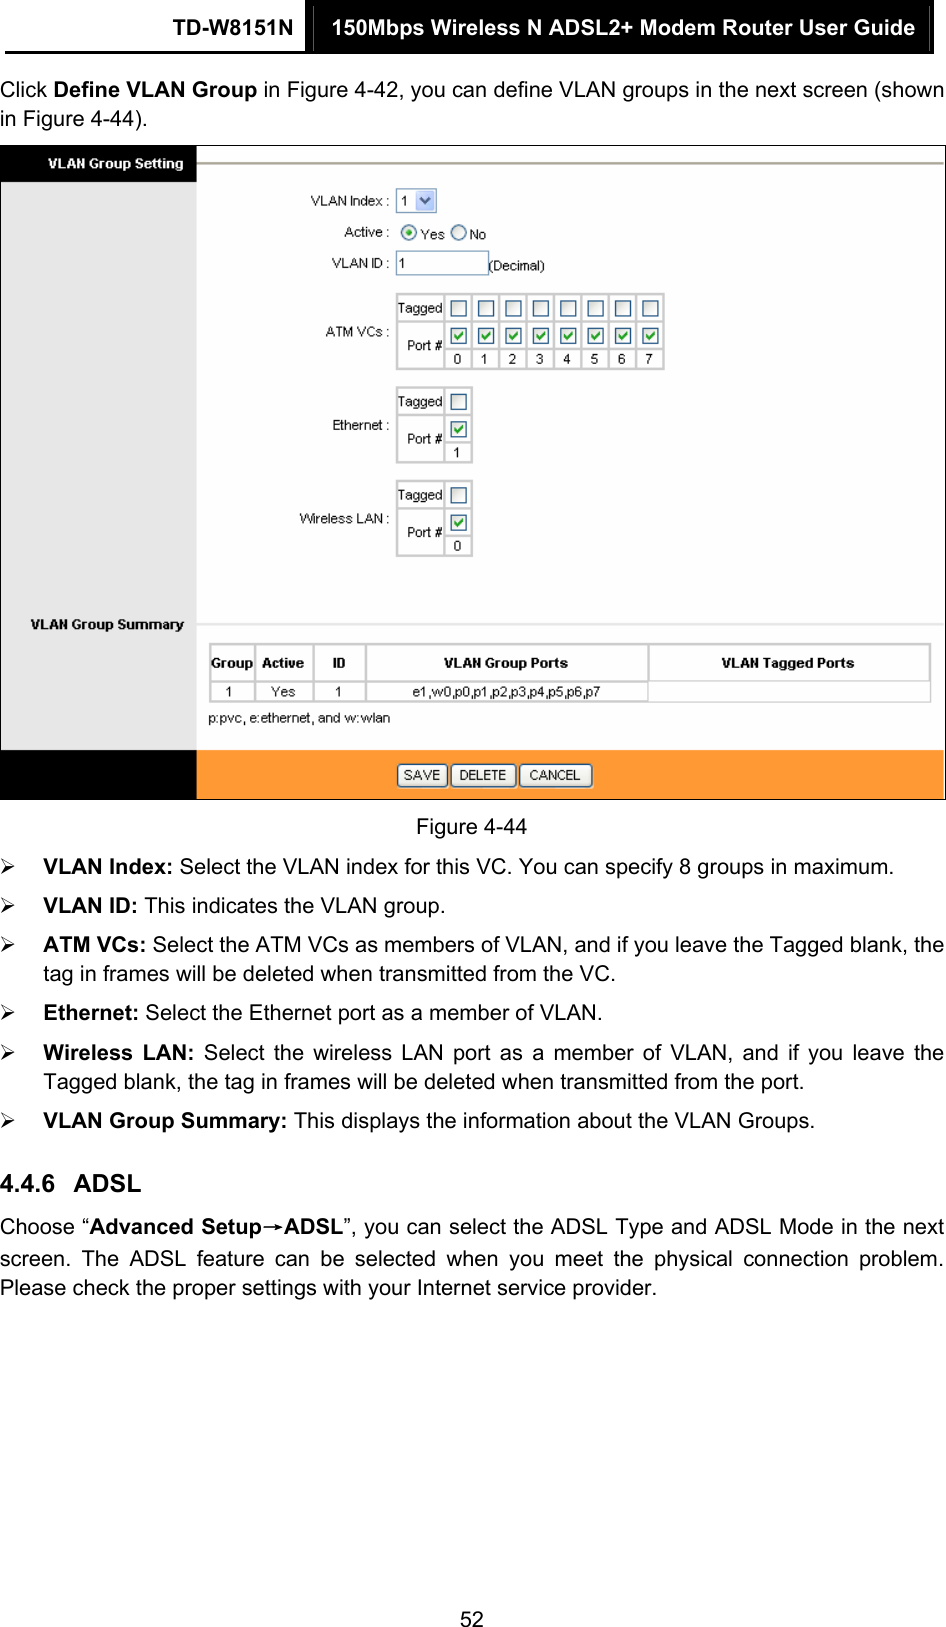 TD-W8151N  150Mbps Wireless N ADSL2+ Modem Router User Guide  52Click Define VLAN Group in Figure 4-42, you can define VLAN groups in the next screen (shown in Figure 4-44).  Figure 4-44  VLAN Index: Select the VLAN index for this VC. You can specify 8 groups in maximum.  VLAN ID: This indicates the VLAN group.  ATM VCs: Select the ATM VCs as members of VLAN, and if you leave the Tagged blank, the tag in frames will be deleted when transmitted from the VC.  Ethernet: Select the Ethernet port as a member of VLAN.  Wireless LAN: Select the wireless LAN port as a member of VLAN, and if you leave the Tagged blank, the tag in frames will be deleted when transmitted from the port.  VLAN Group Summary: This displays the information about the VLAN Groups. 4.4.6  ADSL Choose “Advanced Setup→ADSL”, you can select the ADSL Type and ADSL Mode in the next screen. The ADSL feature can be selected when you meet the physical connection problem. Please check the proper settings with your Internet service provider. 